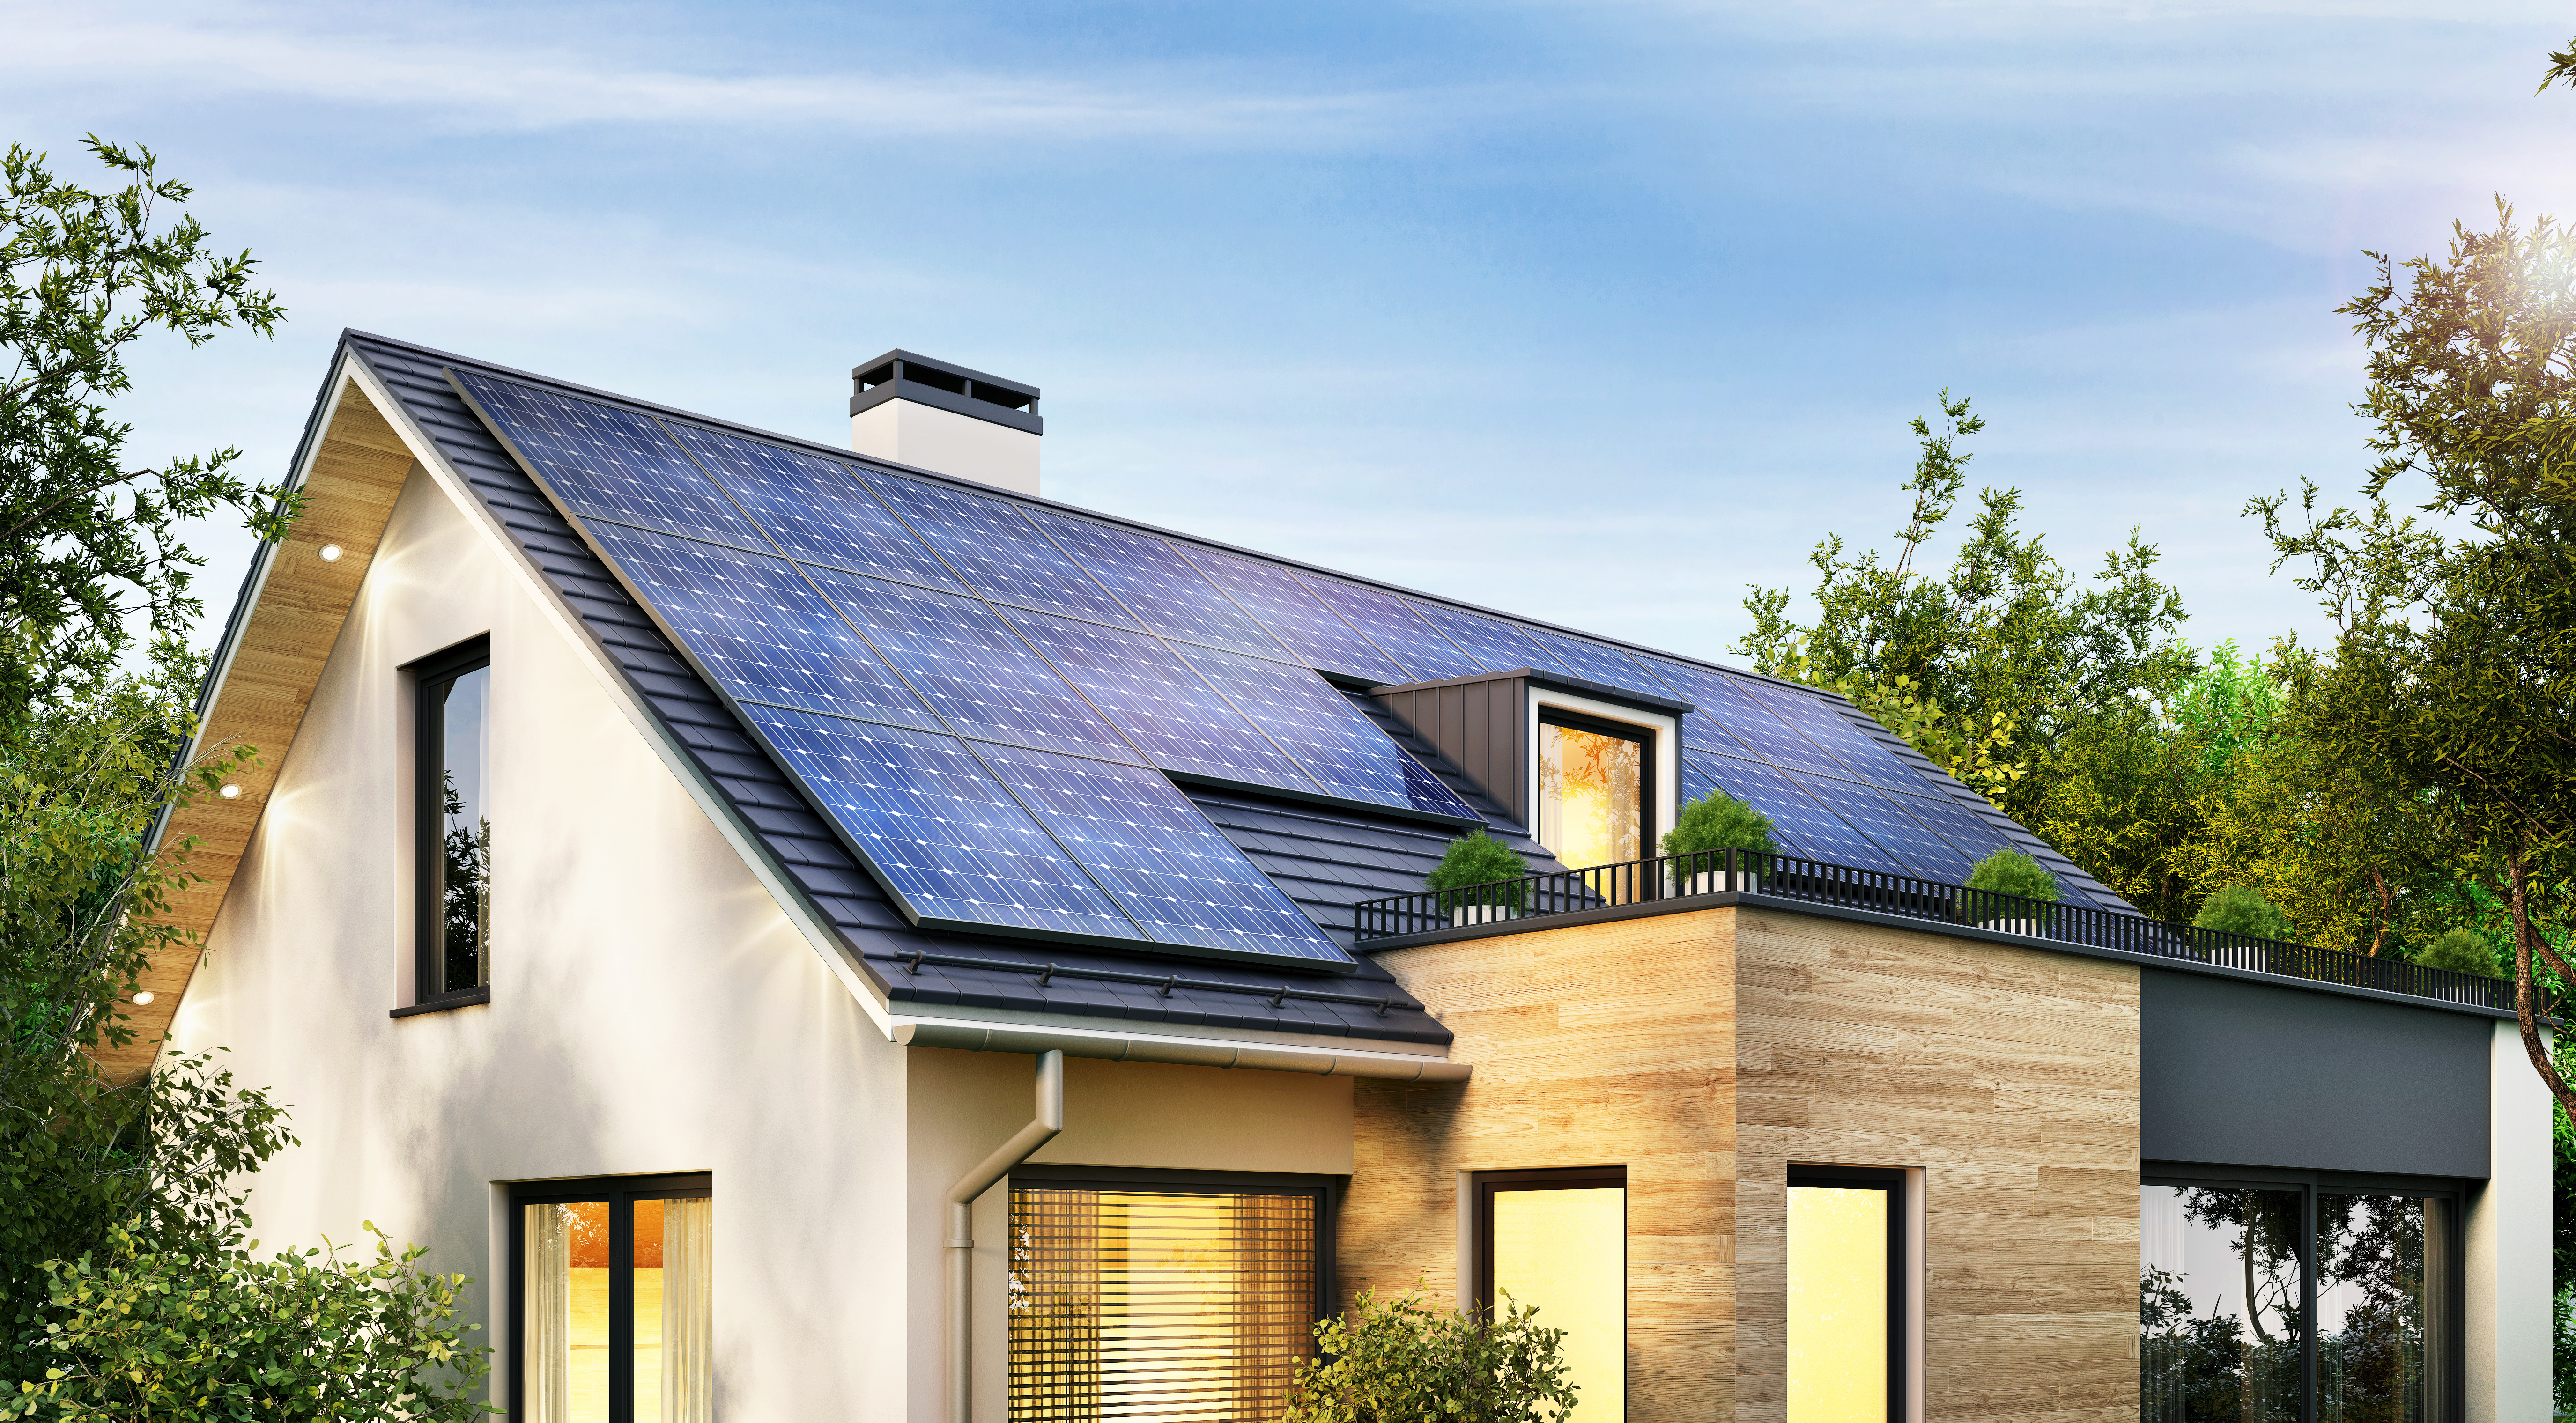 Read: How to Get the Most Out of Your Solar Panels